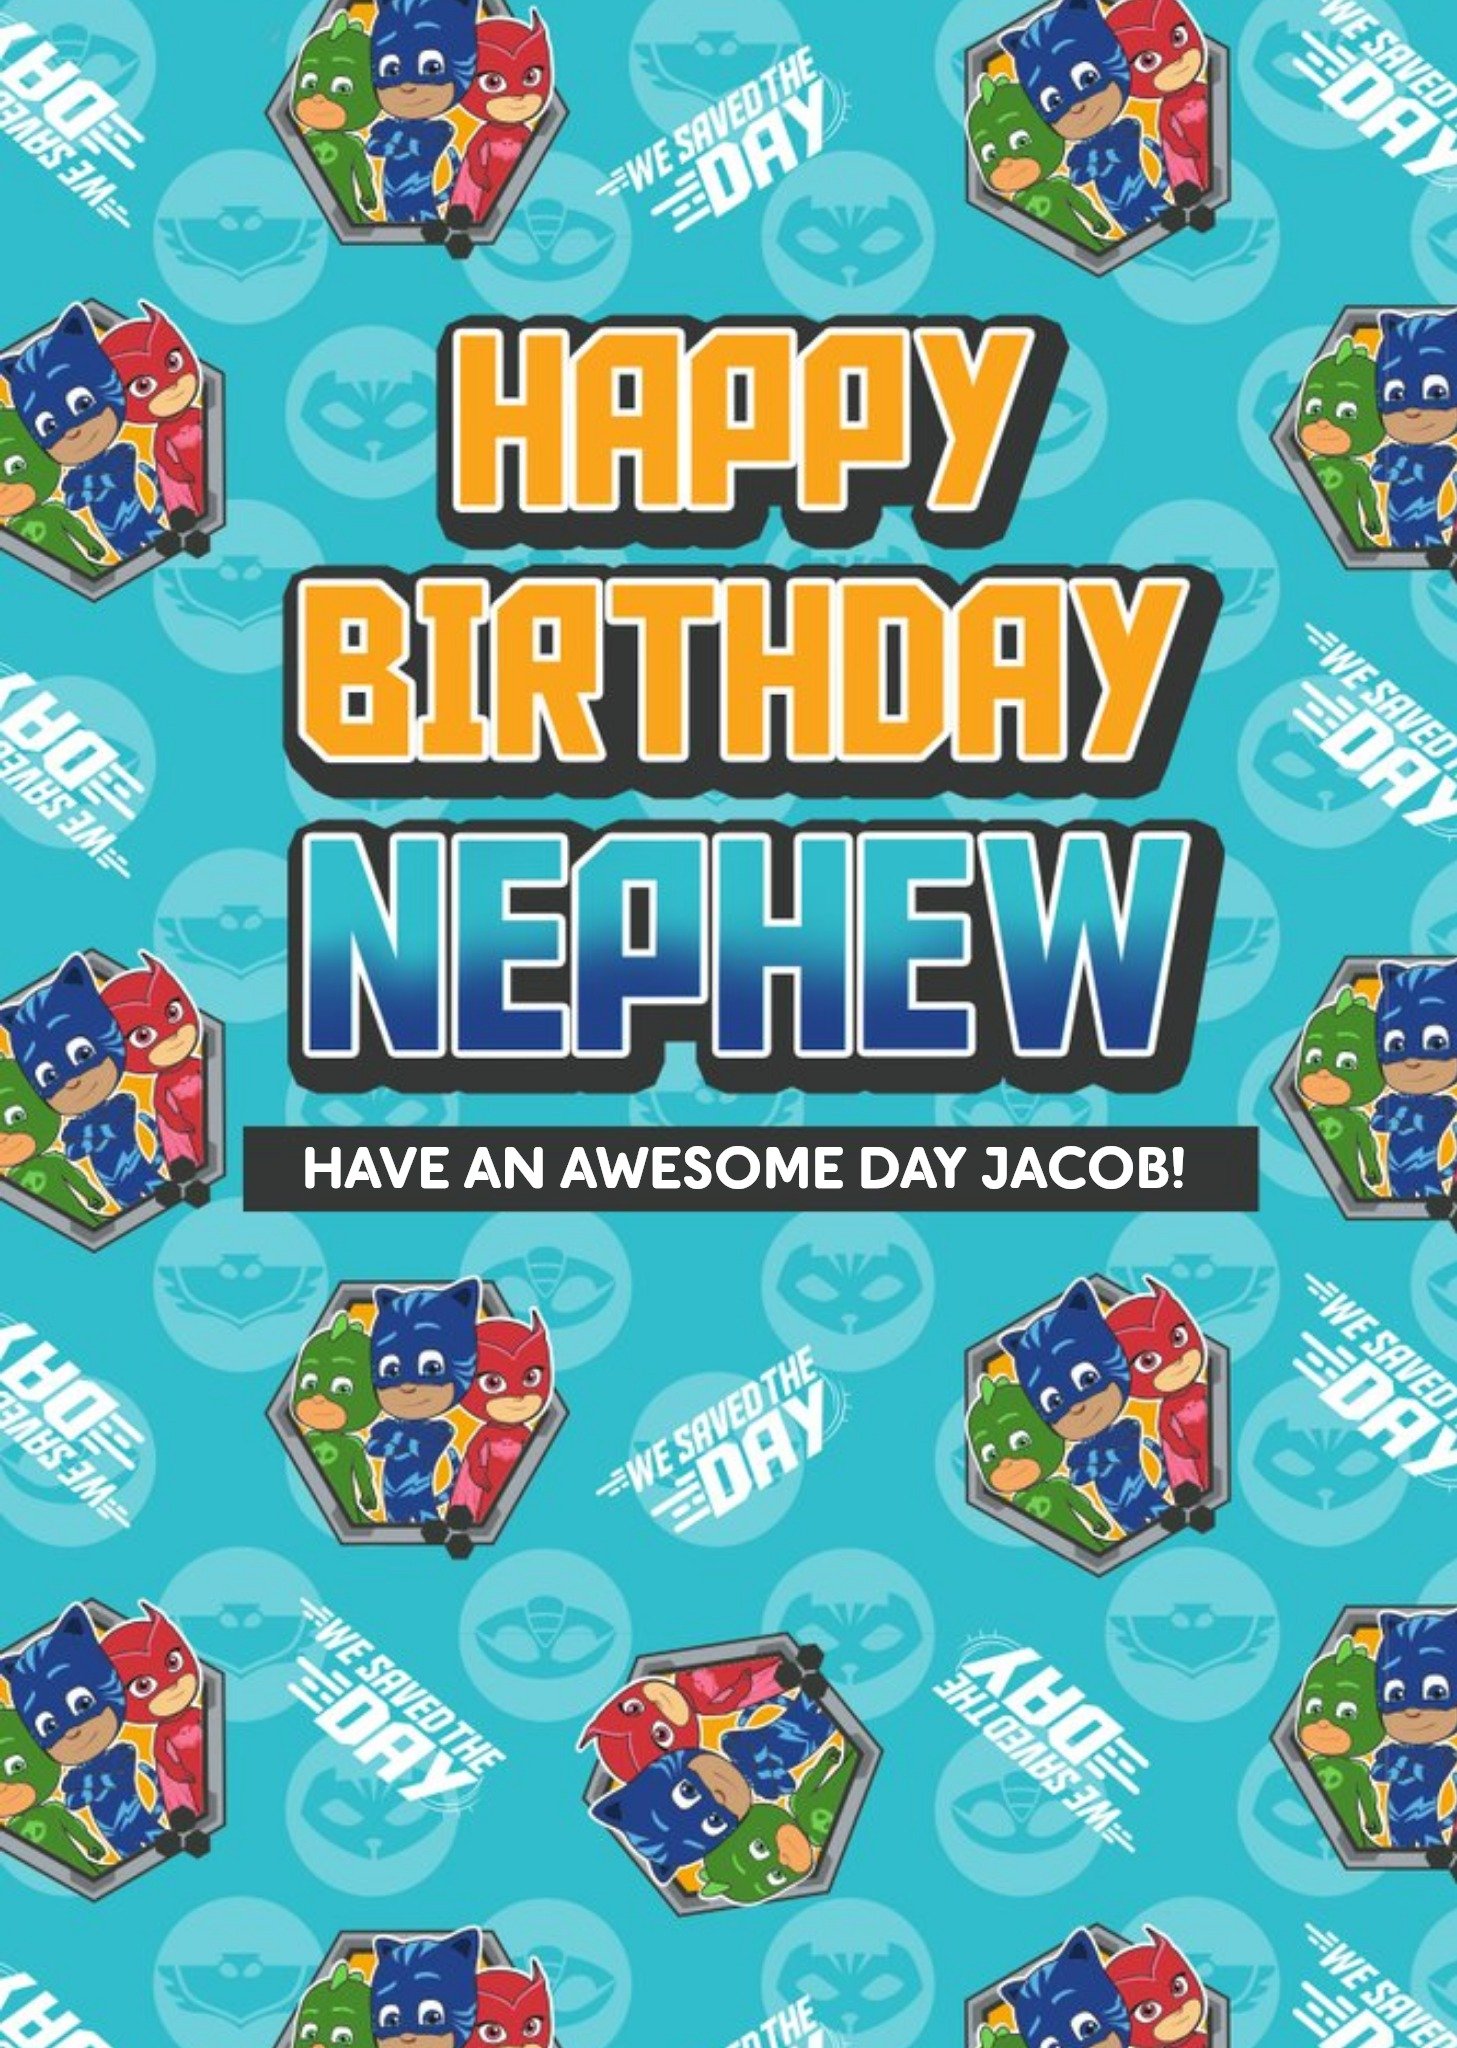 Pj Masks Have An Awesome Day Birthday Card For Nephew, Large